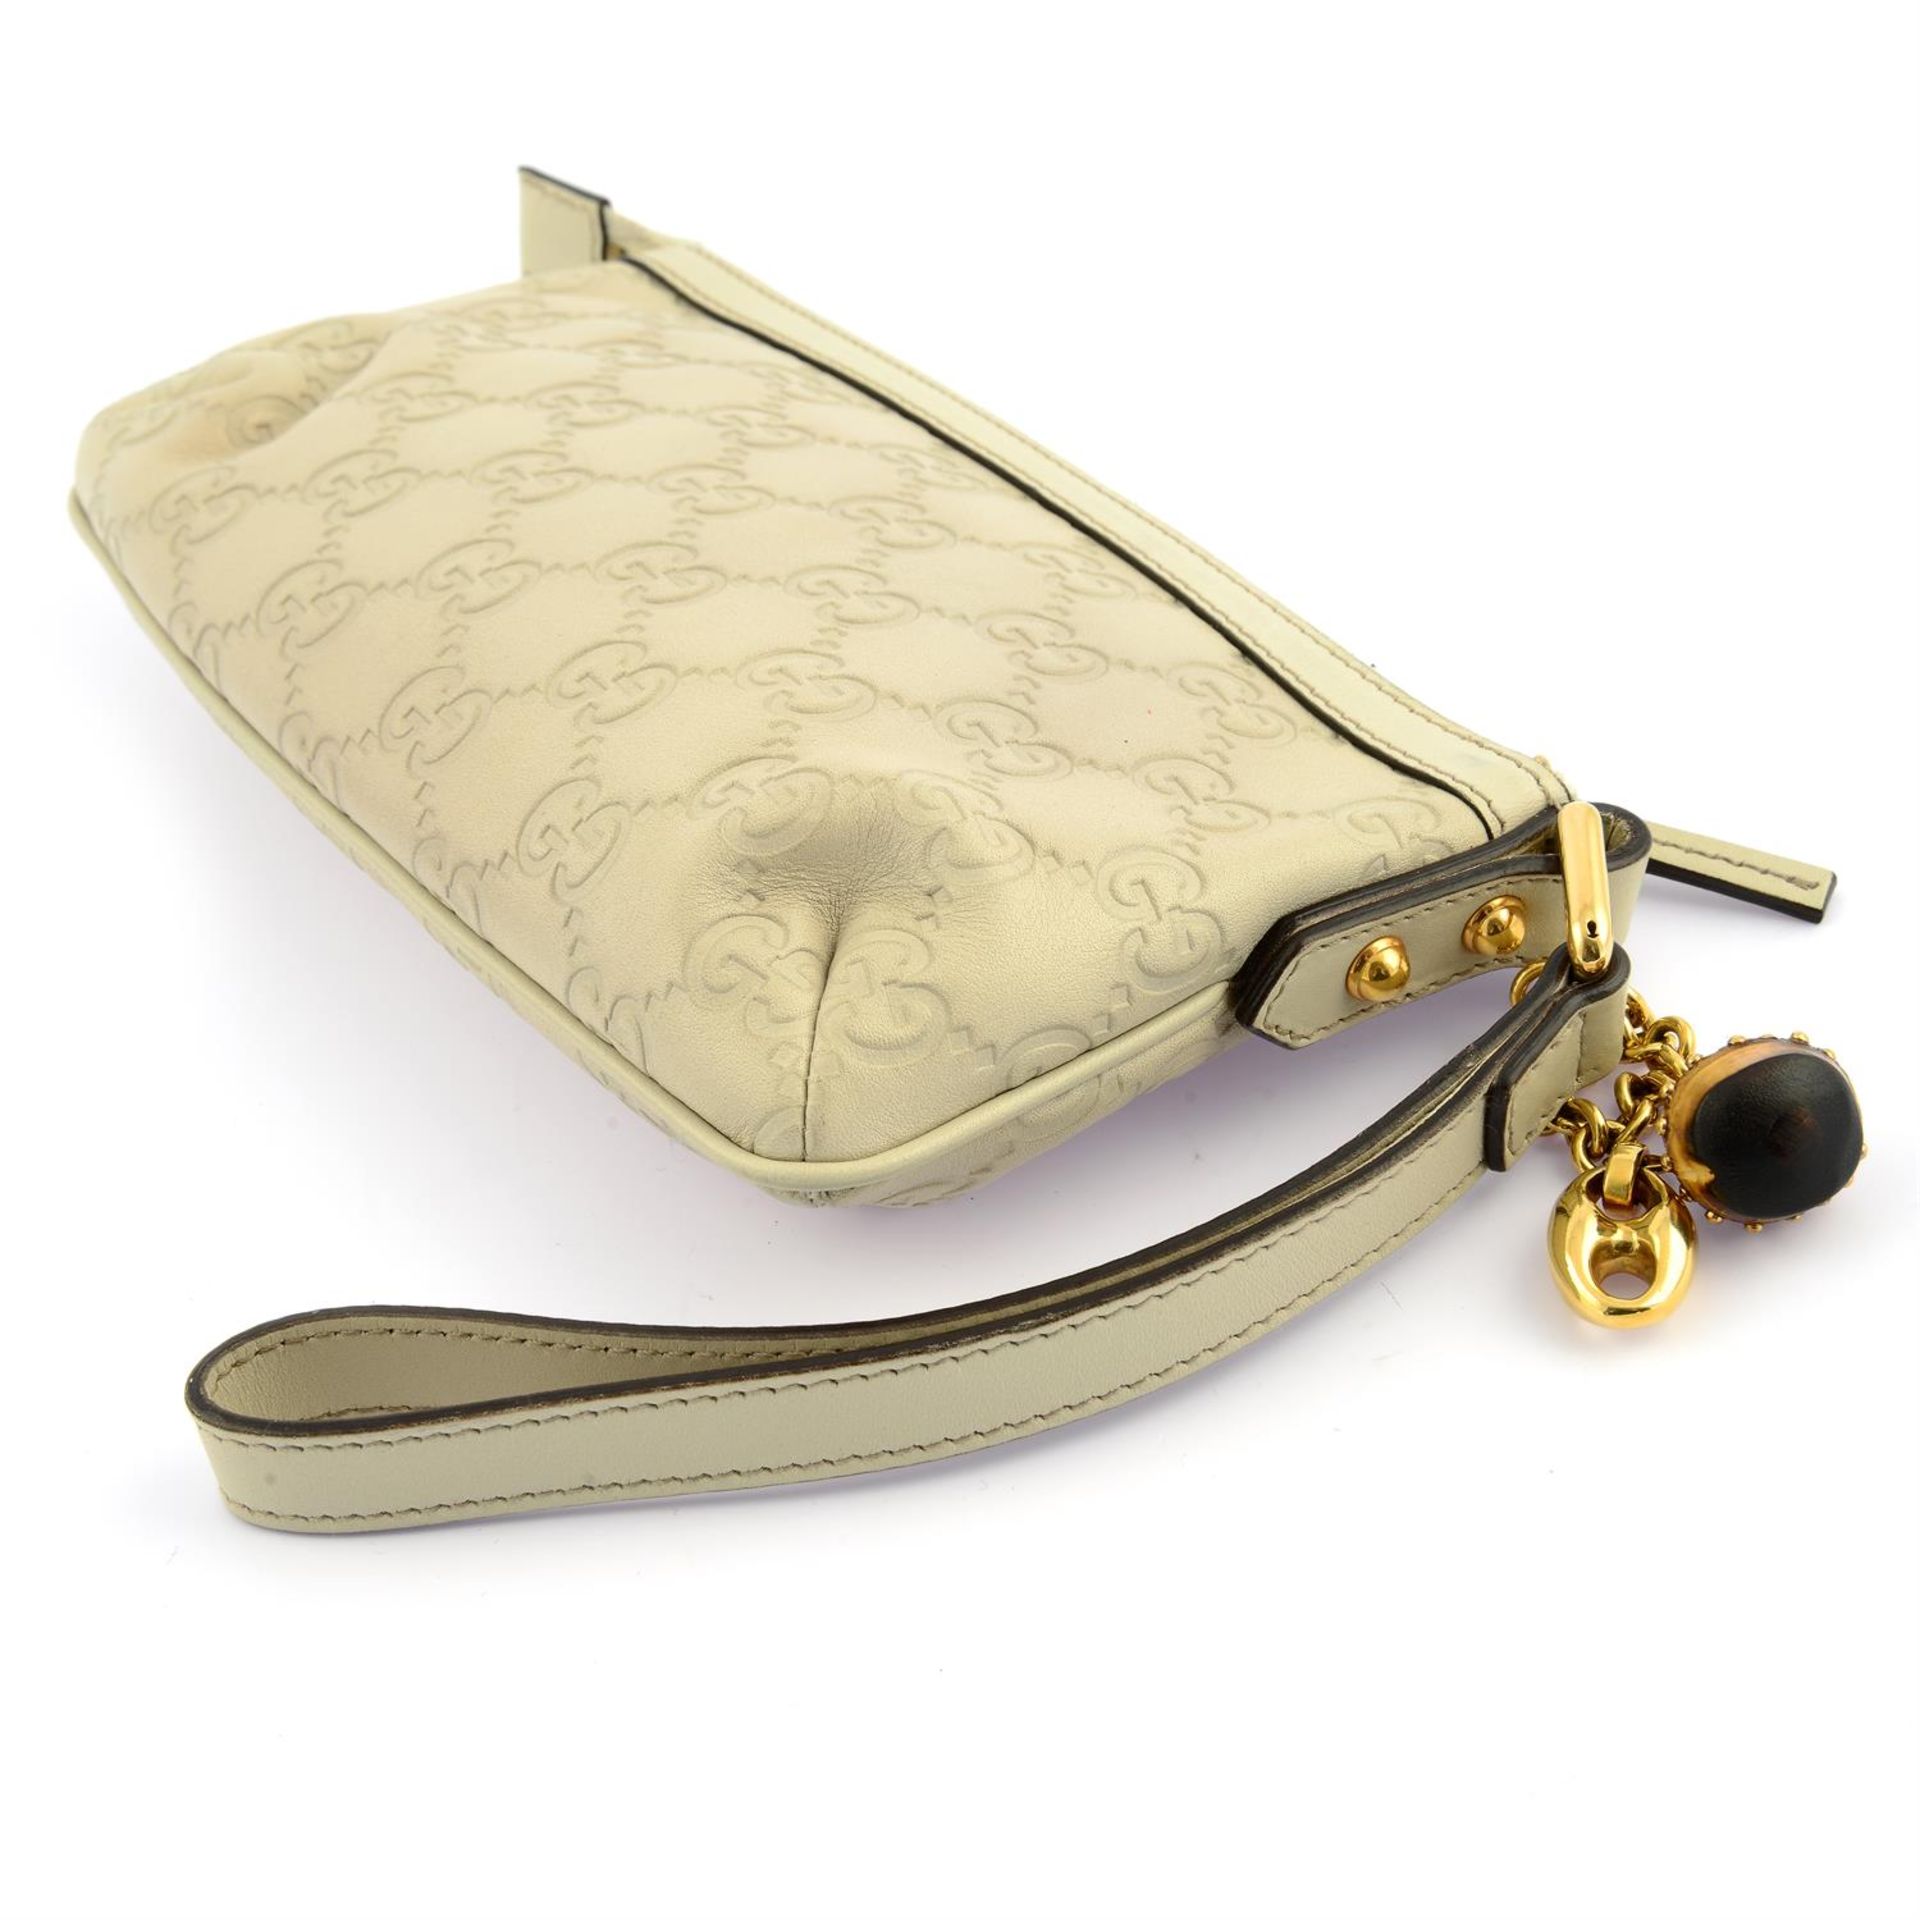 GUCCI - a beige leather Guccissima wristlet. - Image 2 of 3